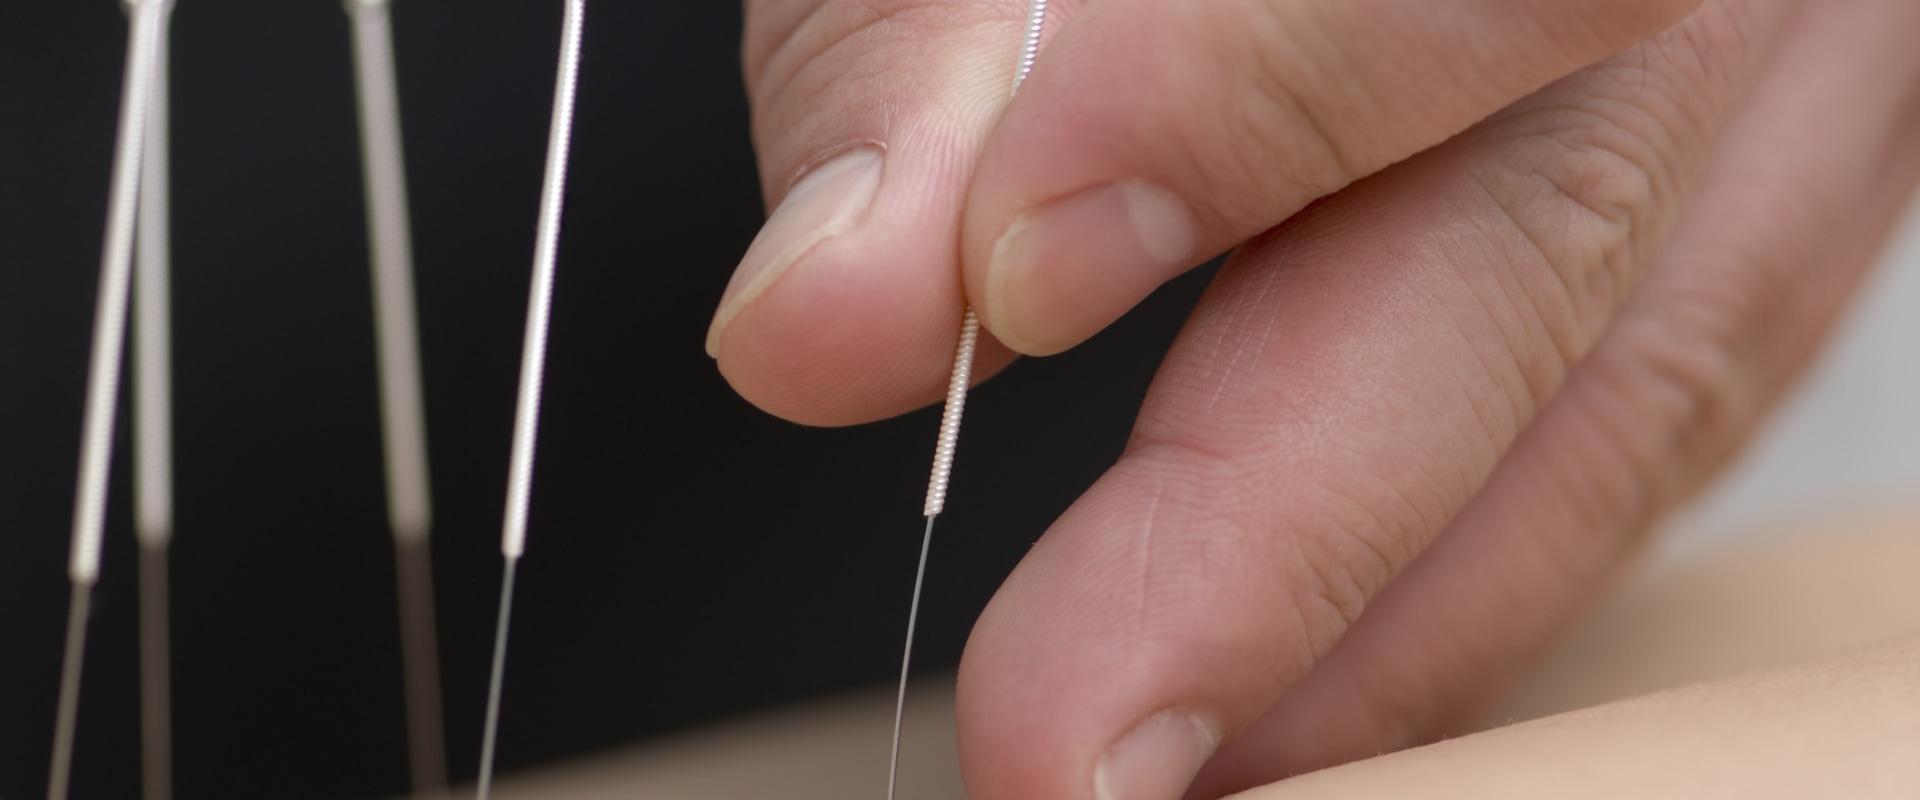 What Are the Risks of Acupuncture?